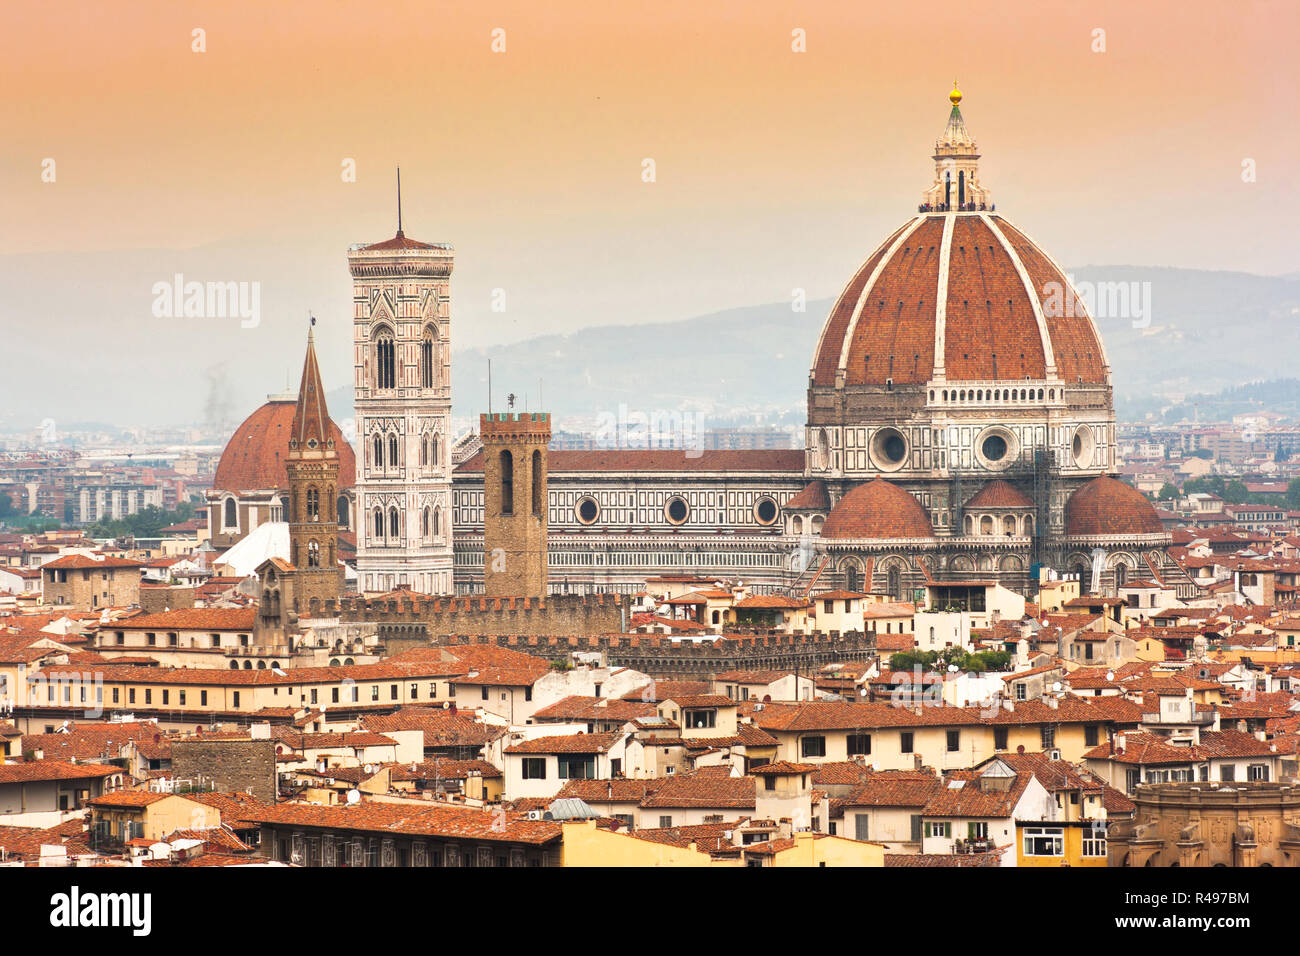 Cathedral Santa Maria Del Fiore with Giotto's Campanile at sunset in Florence, Italy Stock Photo